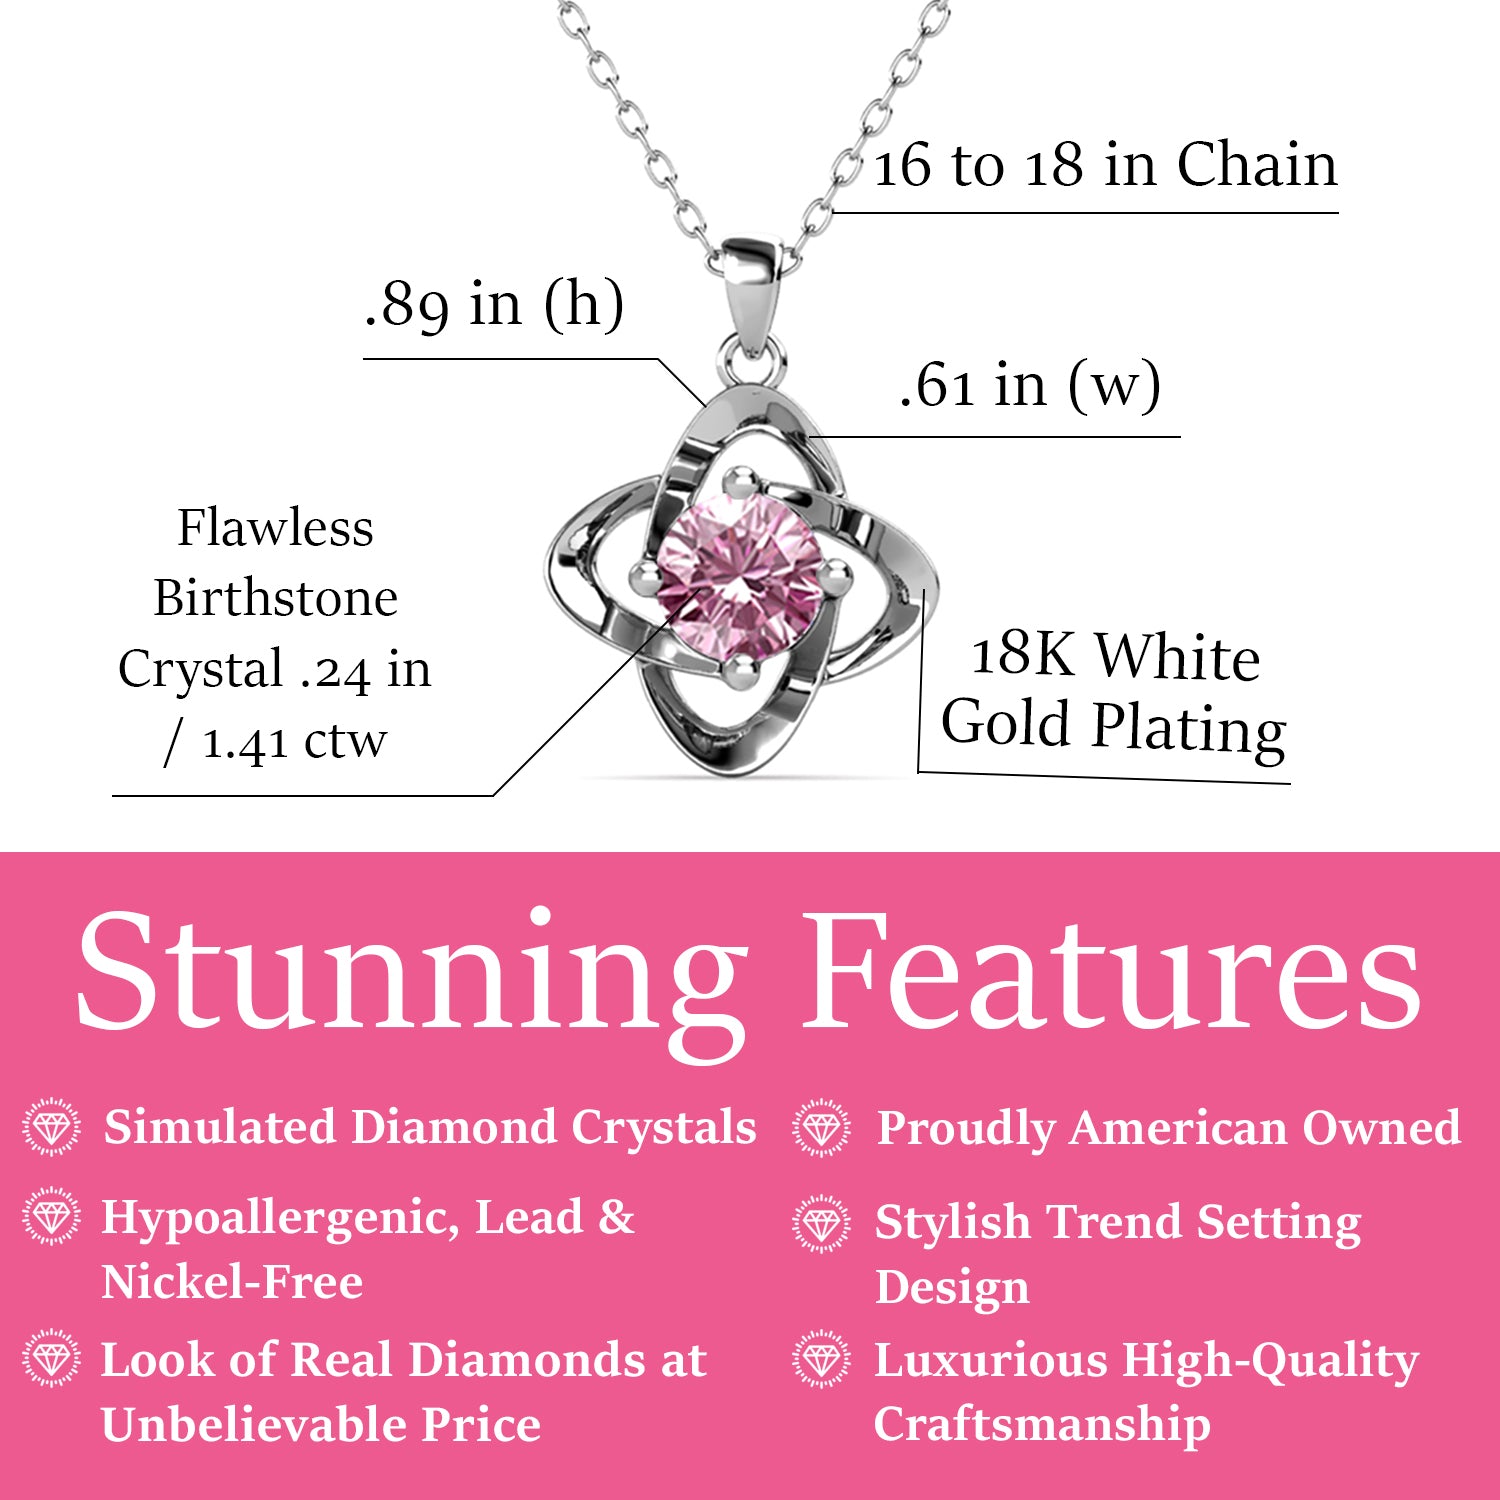 Infinity October Birthstone Pink Tourmaline Necklace, 18k White Gold Plated Silver Birthstone Crystal Necklace